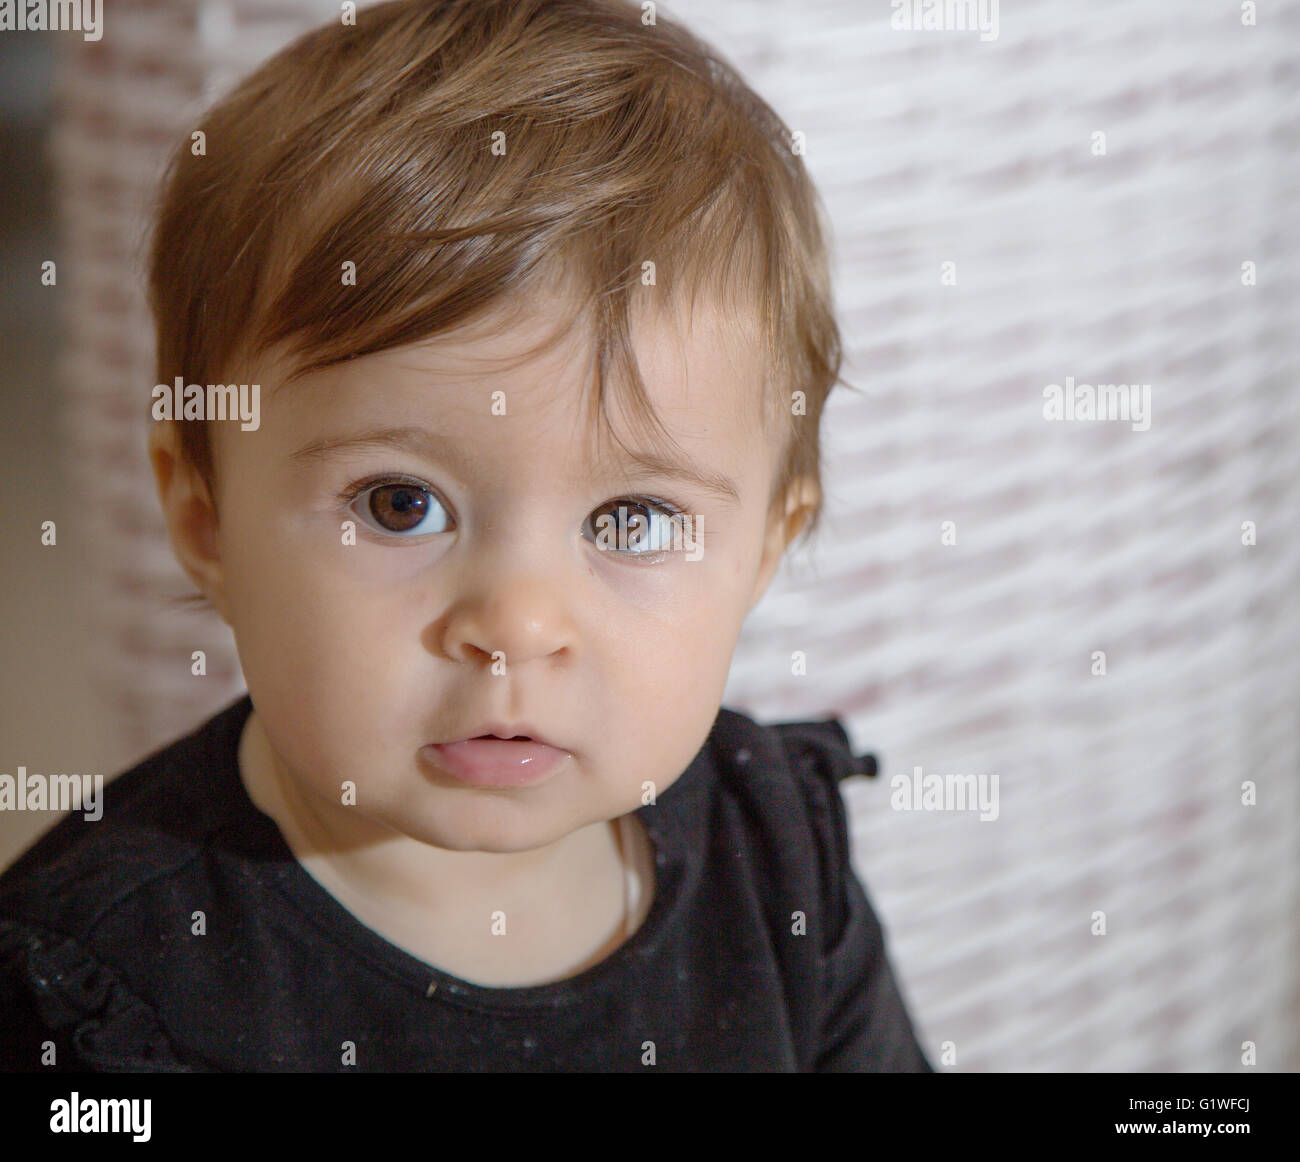 Portrait of one year old baby with brown eyes looking calmly at camera Stock Photo